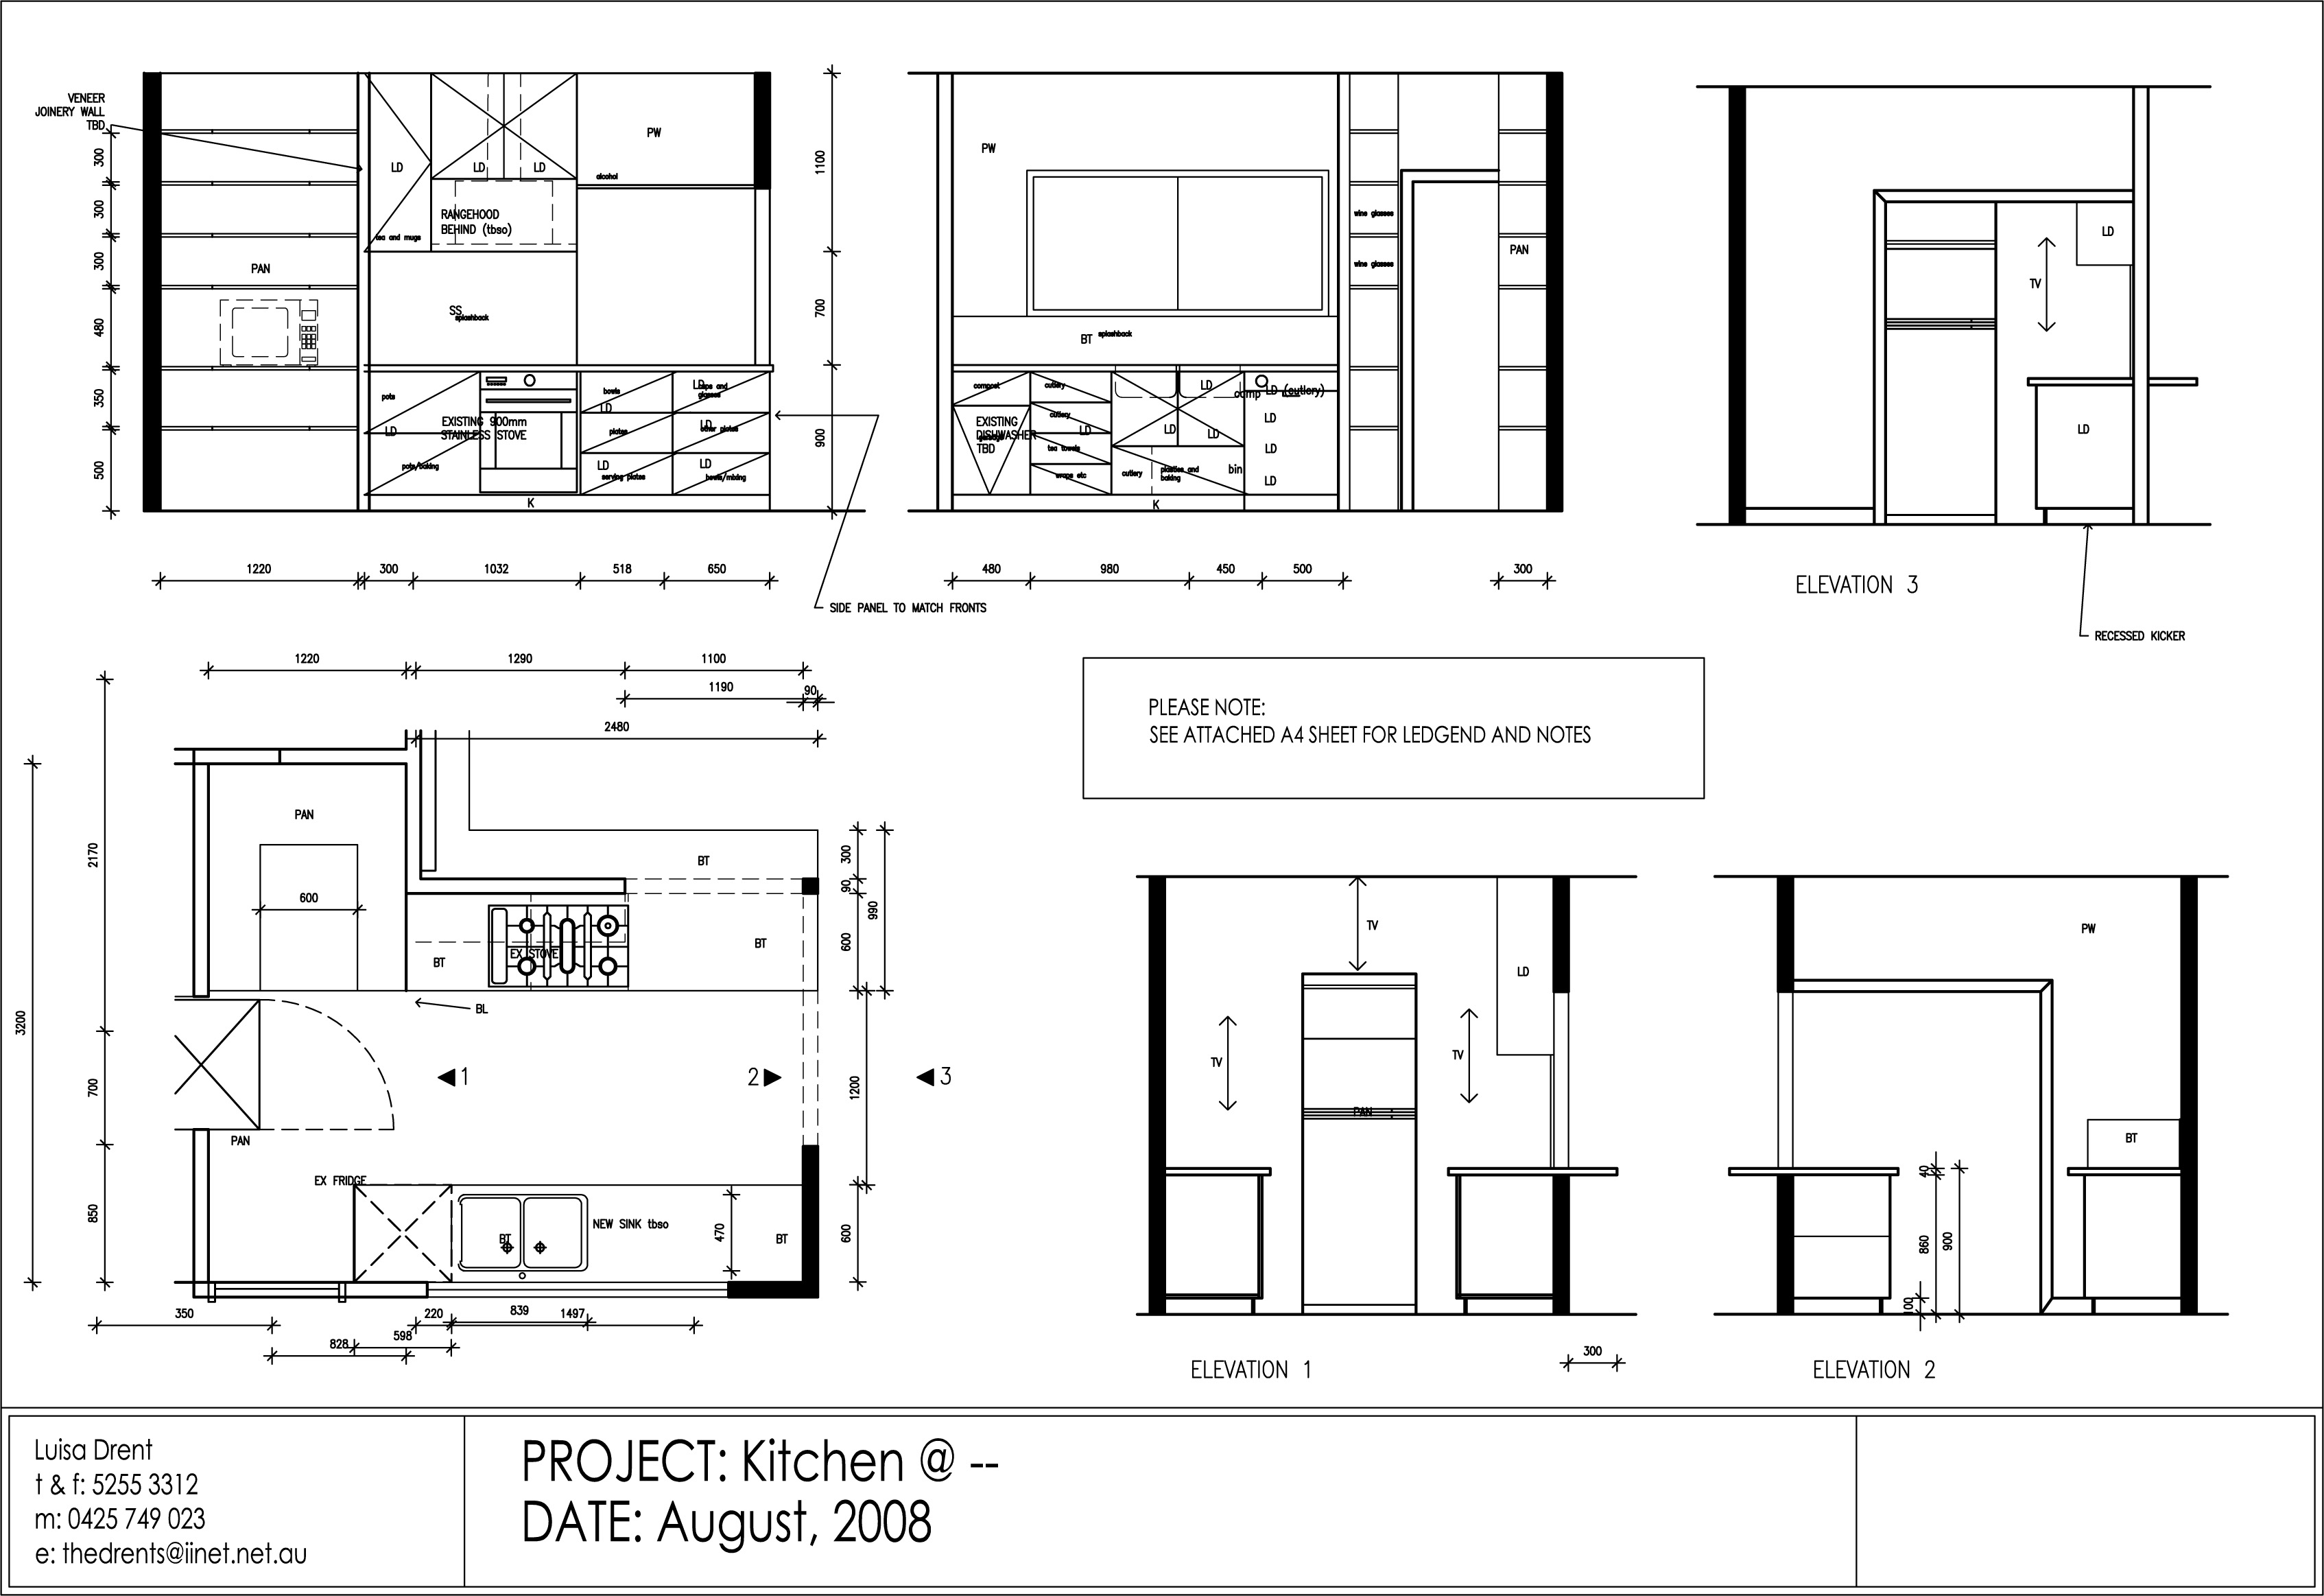 some internal fit-out drawings | Interior Design Blog